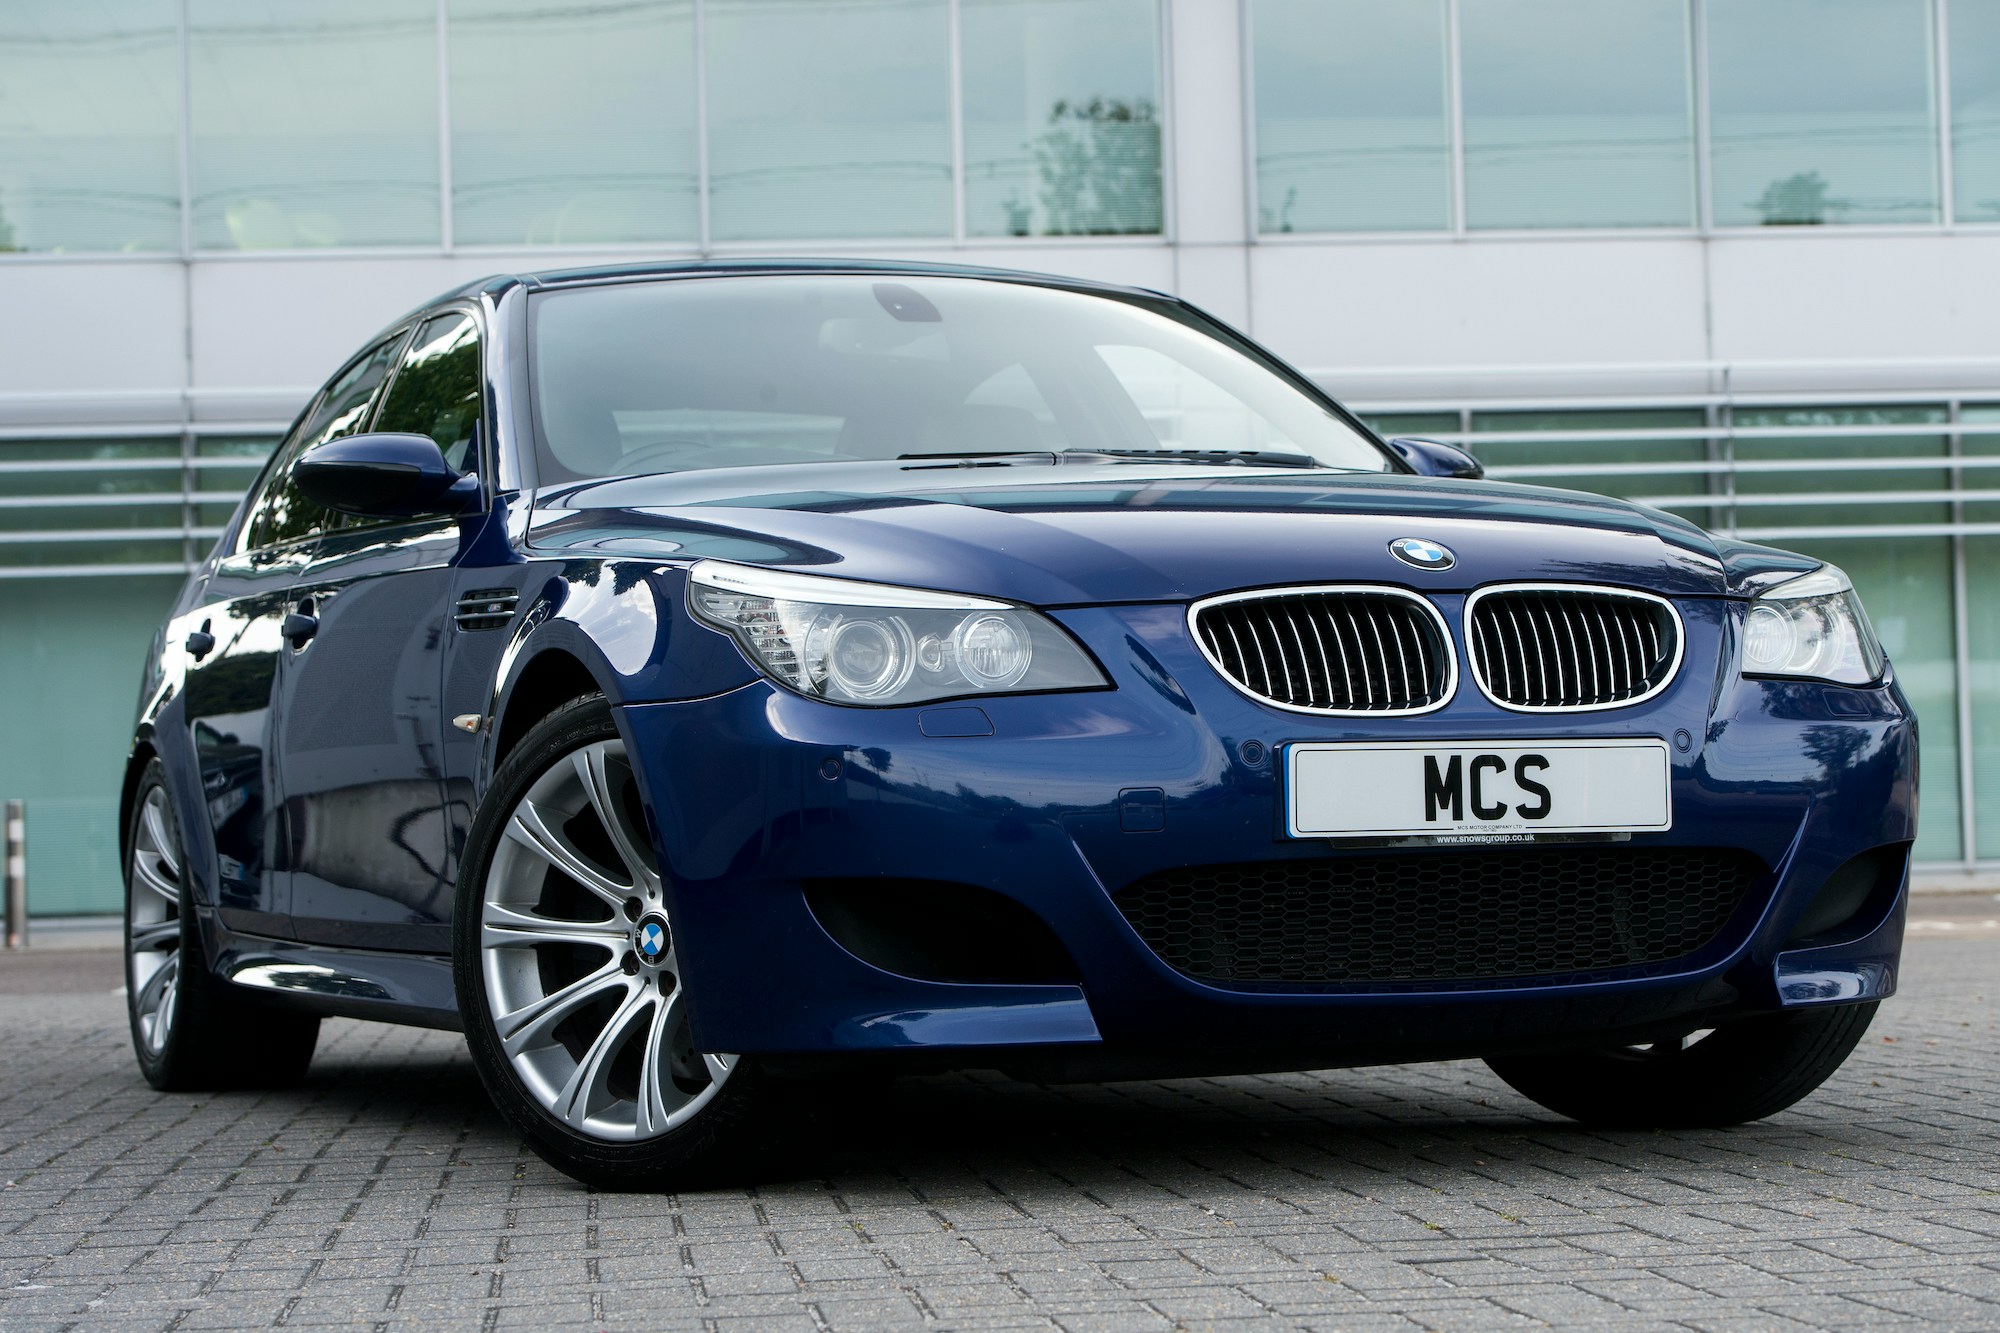 2008 BMW (E60) M5 for sale by auction in Waterlooville, Hampshire, United  Kingdom